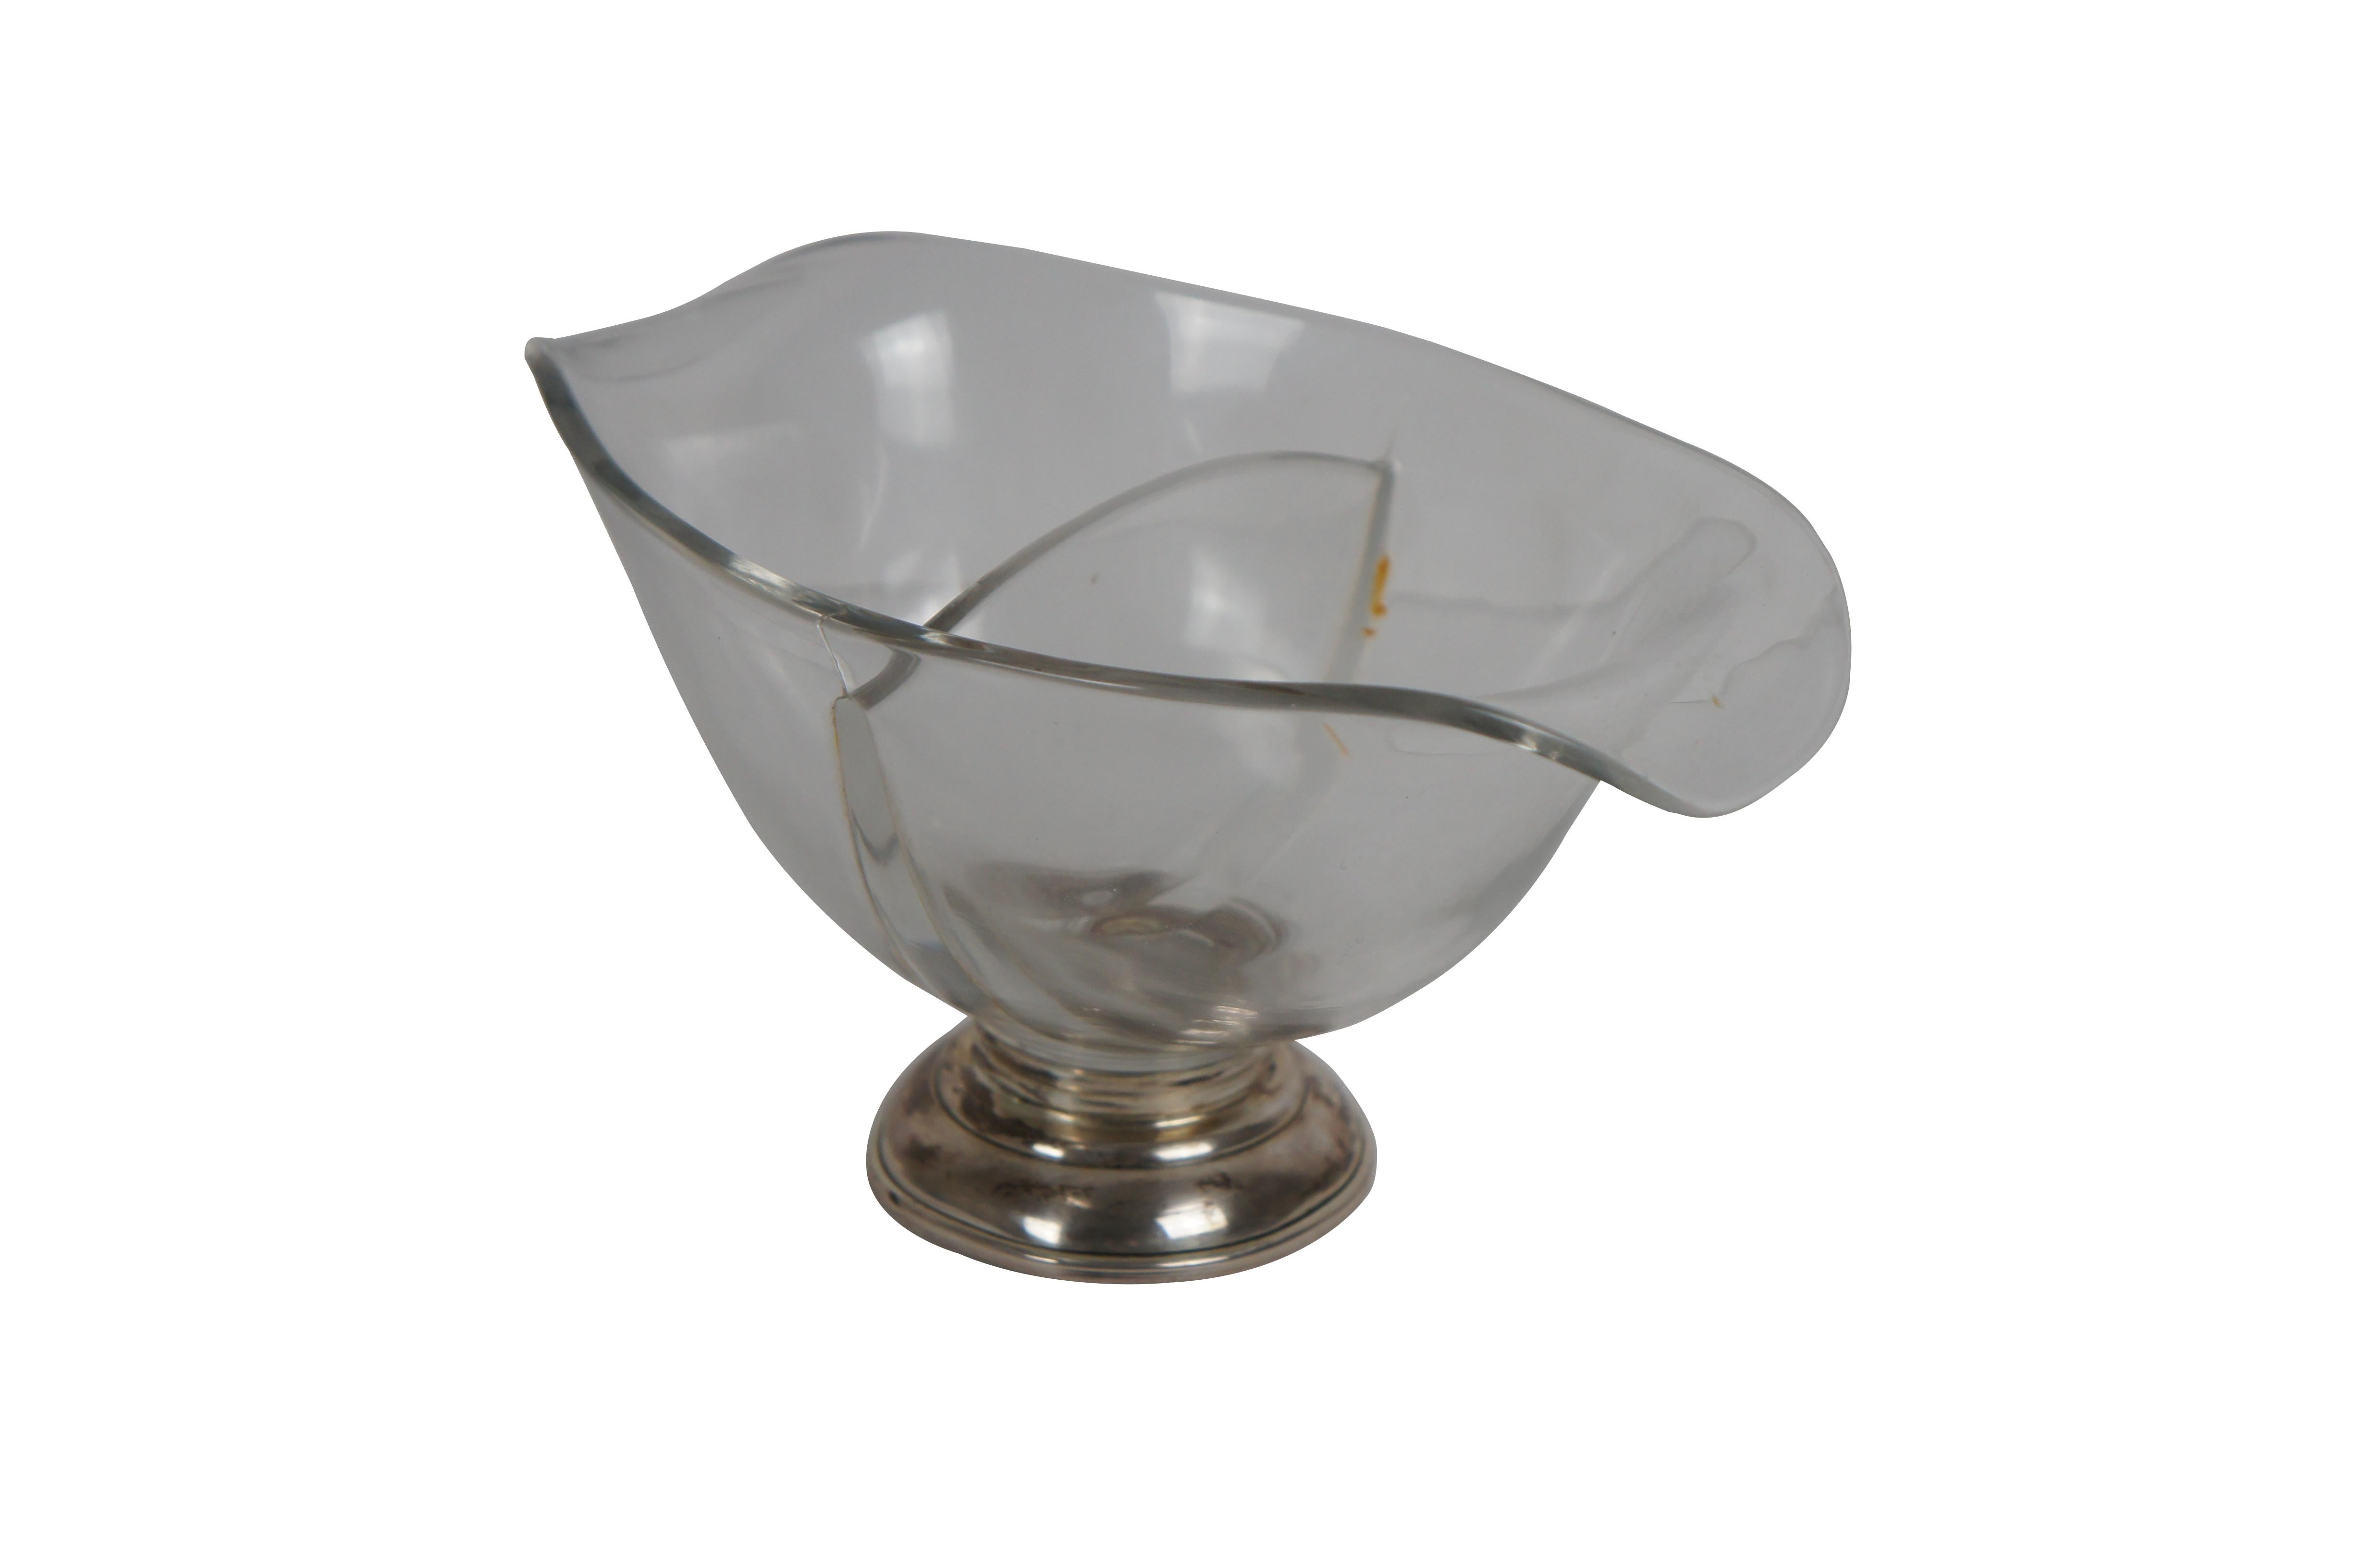 Vintage plain glass candy / nut dish featuring a boat shape with sloping lips at either end, divided into two sections, with a sterling silver pedestal base. Marked B-I Sterling.

Dimensions:
7.5